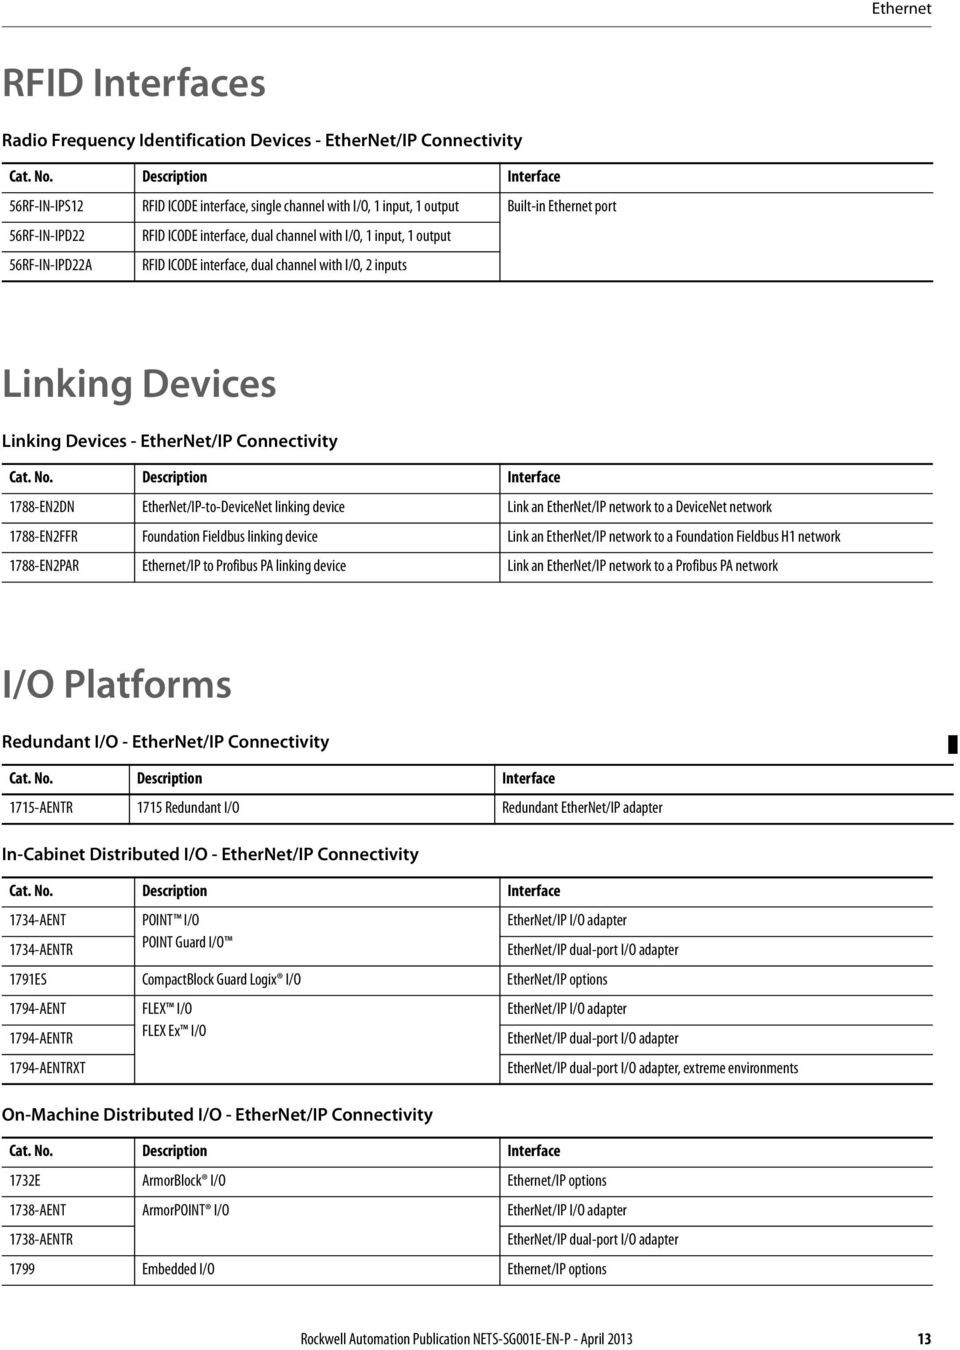 Connectivity 1788-EN2DN EtherNet/IP-to-DeviceNet linking device Link an EtherNet/IP network to a DeviceNet network 1788-EN2FFR Foundation Fieldbus linking device Link an EtherNet/IP network to a